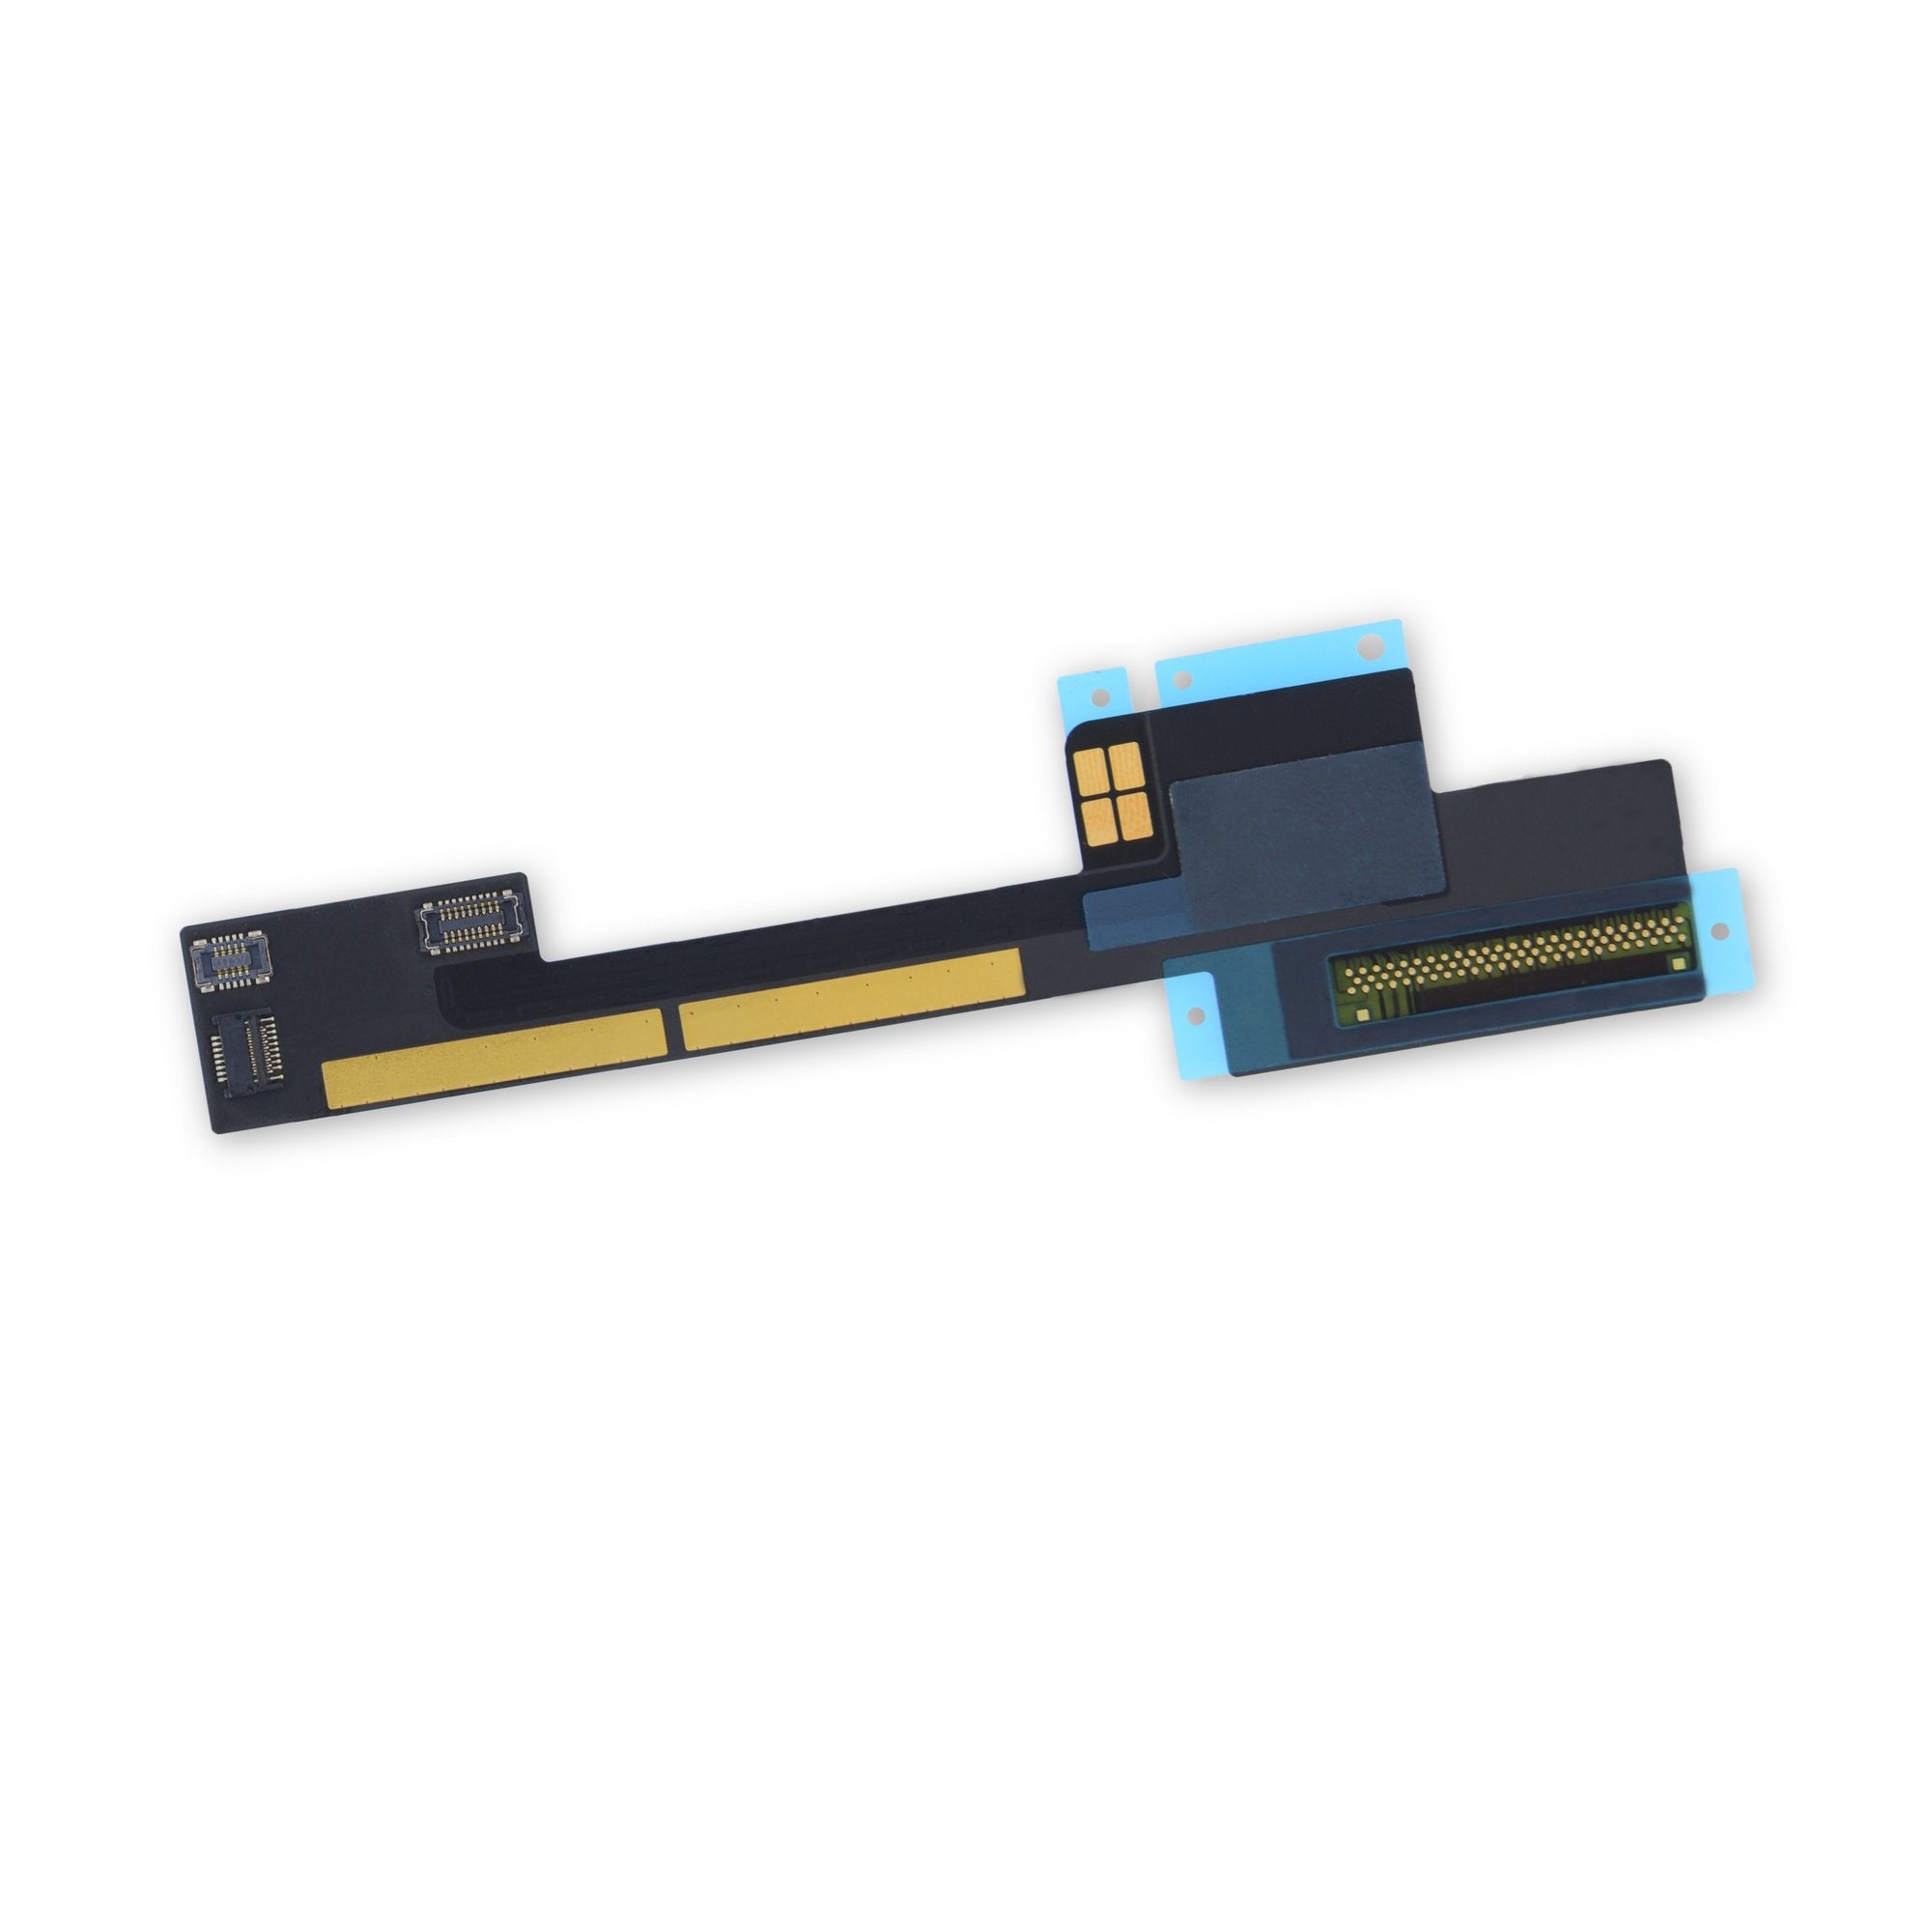 iPad Pro 9.7" (Cellular) Logic Board Connector Cable